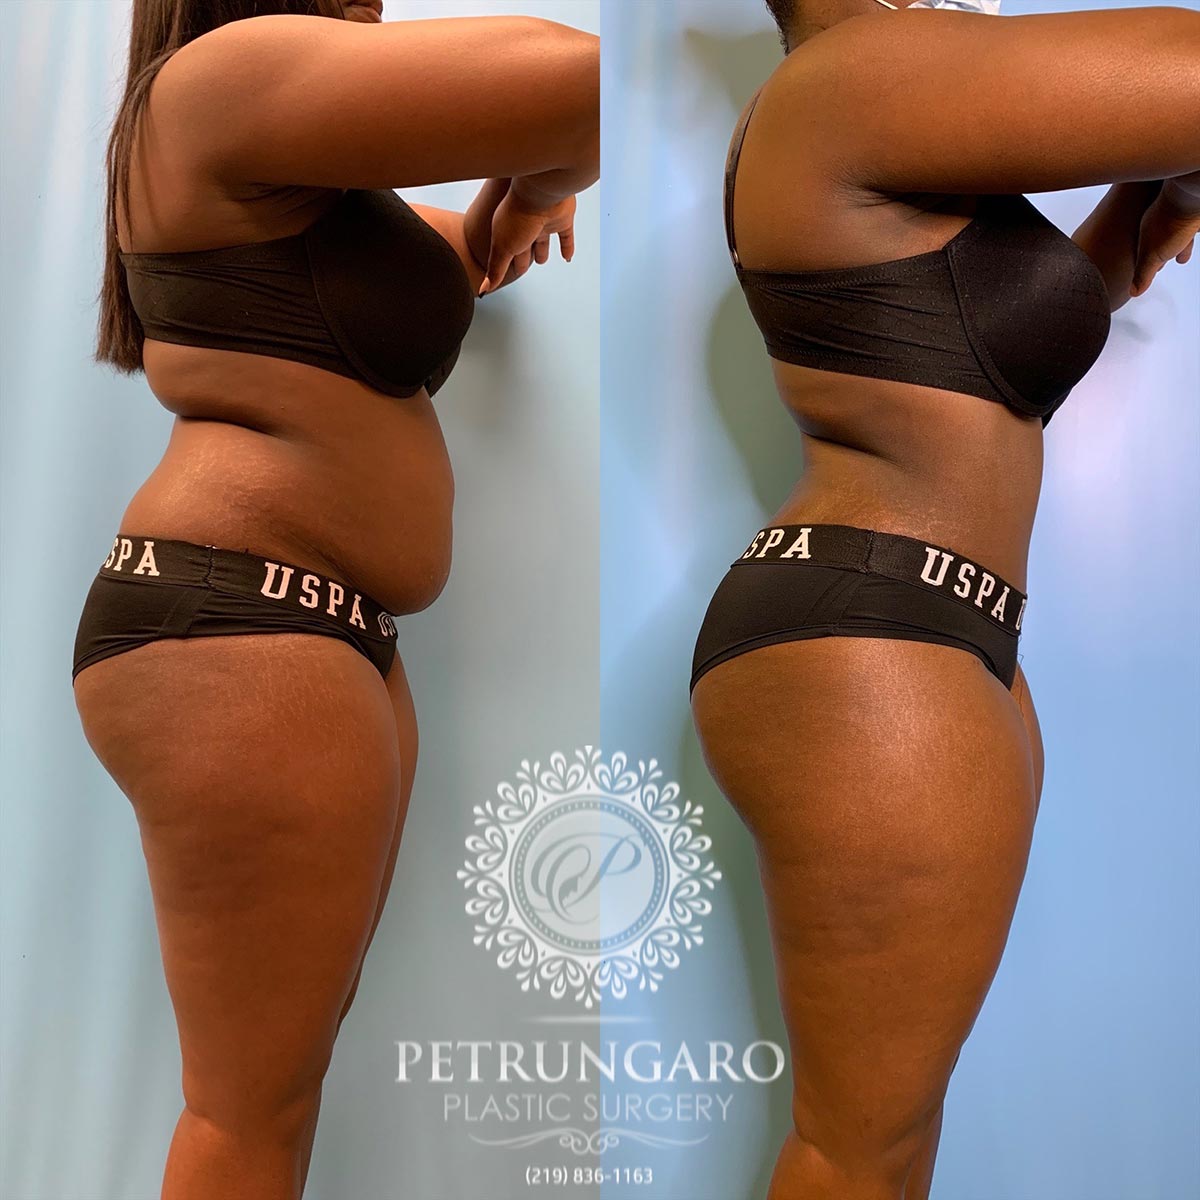 30 year old woman 3 months after tummy tuck with Lipo 360-3